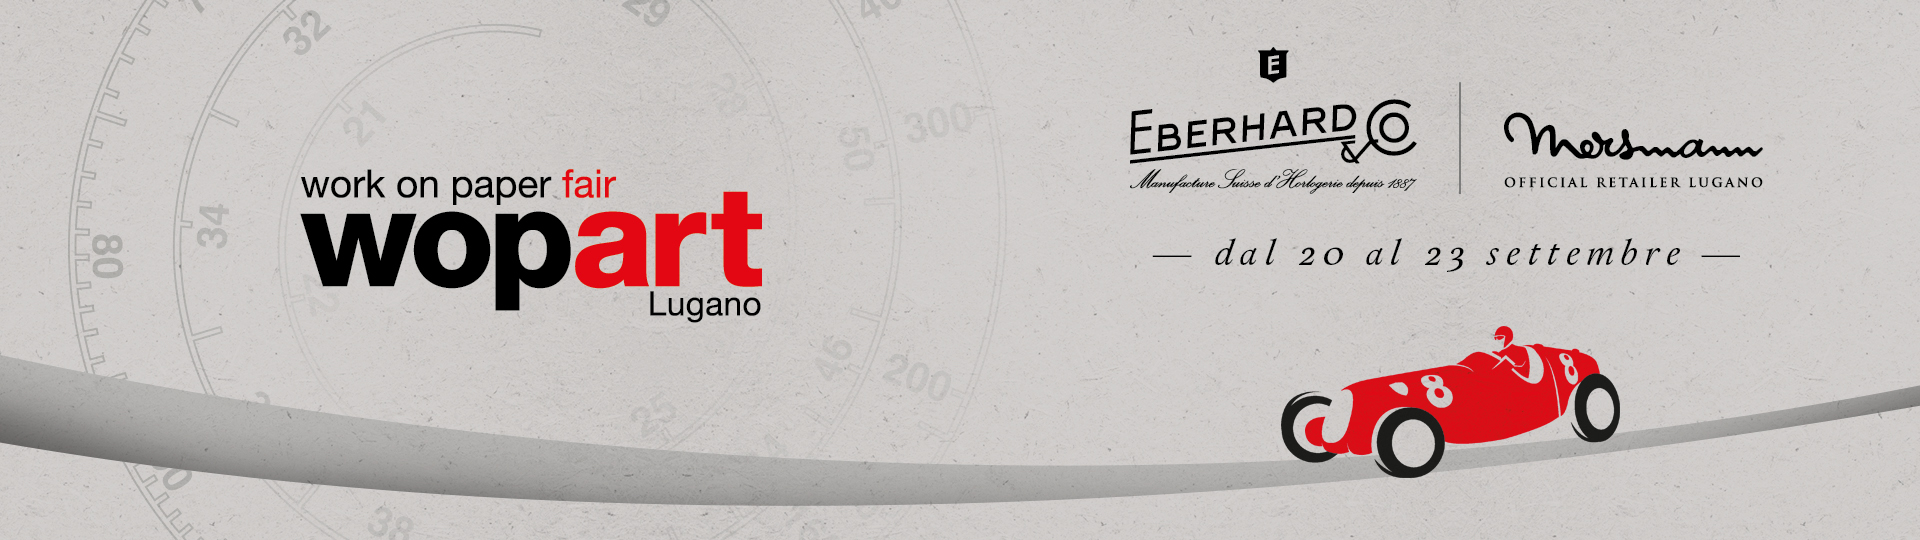 EBERHARD & CO. SUPPORTS WOPART – WORKS ON PAPER ART FAIR